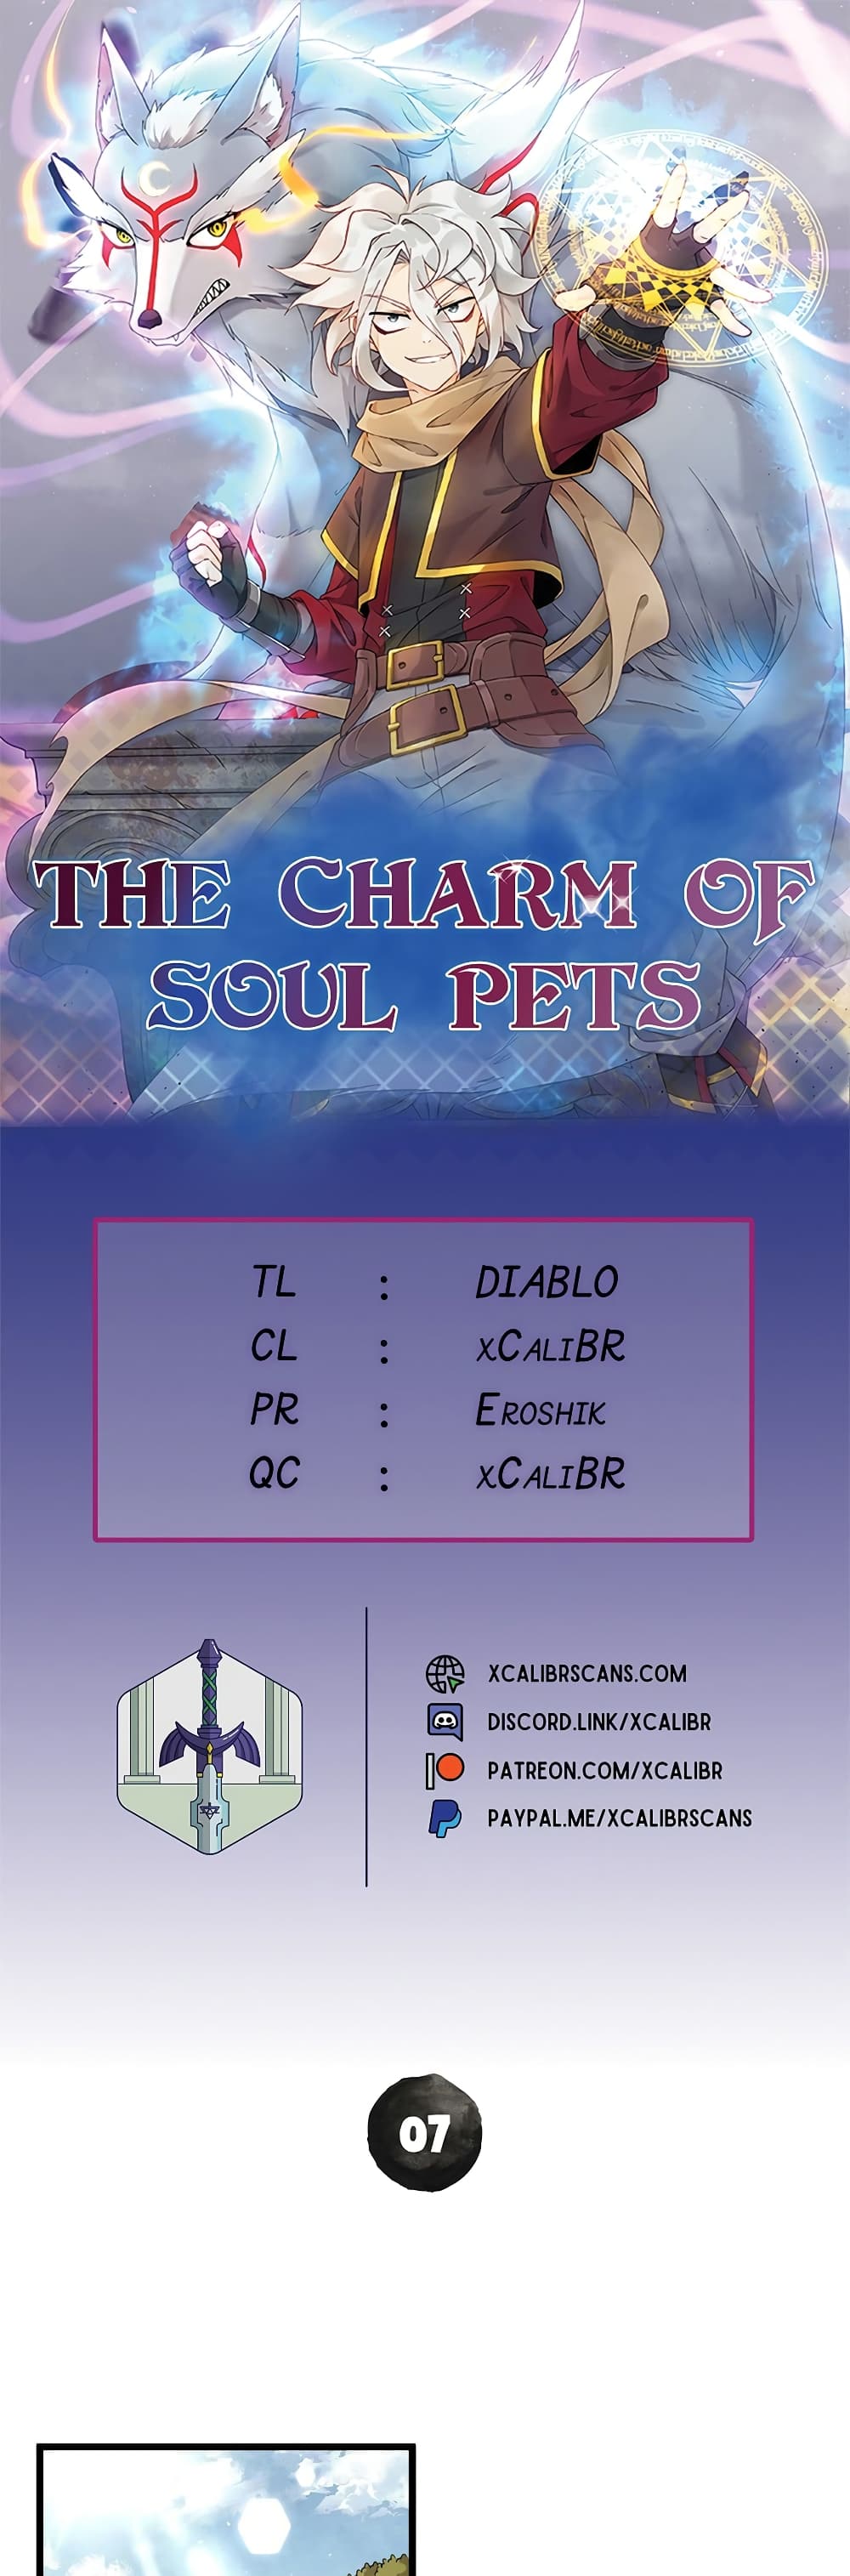 The Charm of Soul Pets 7-7